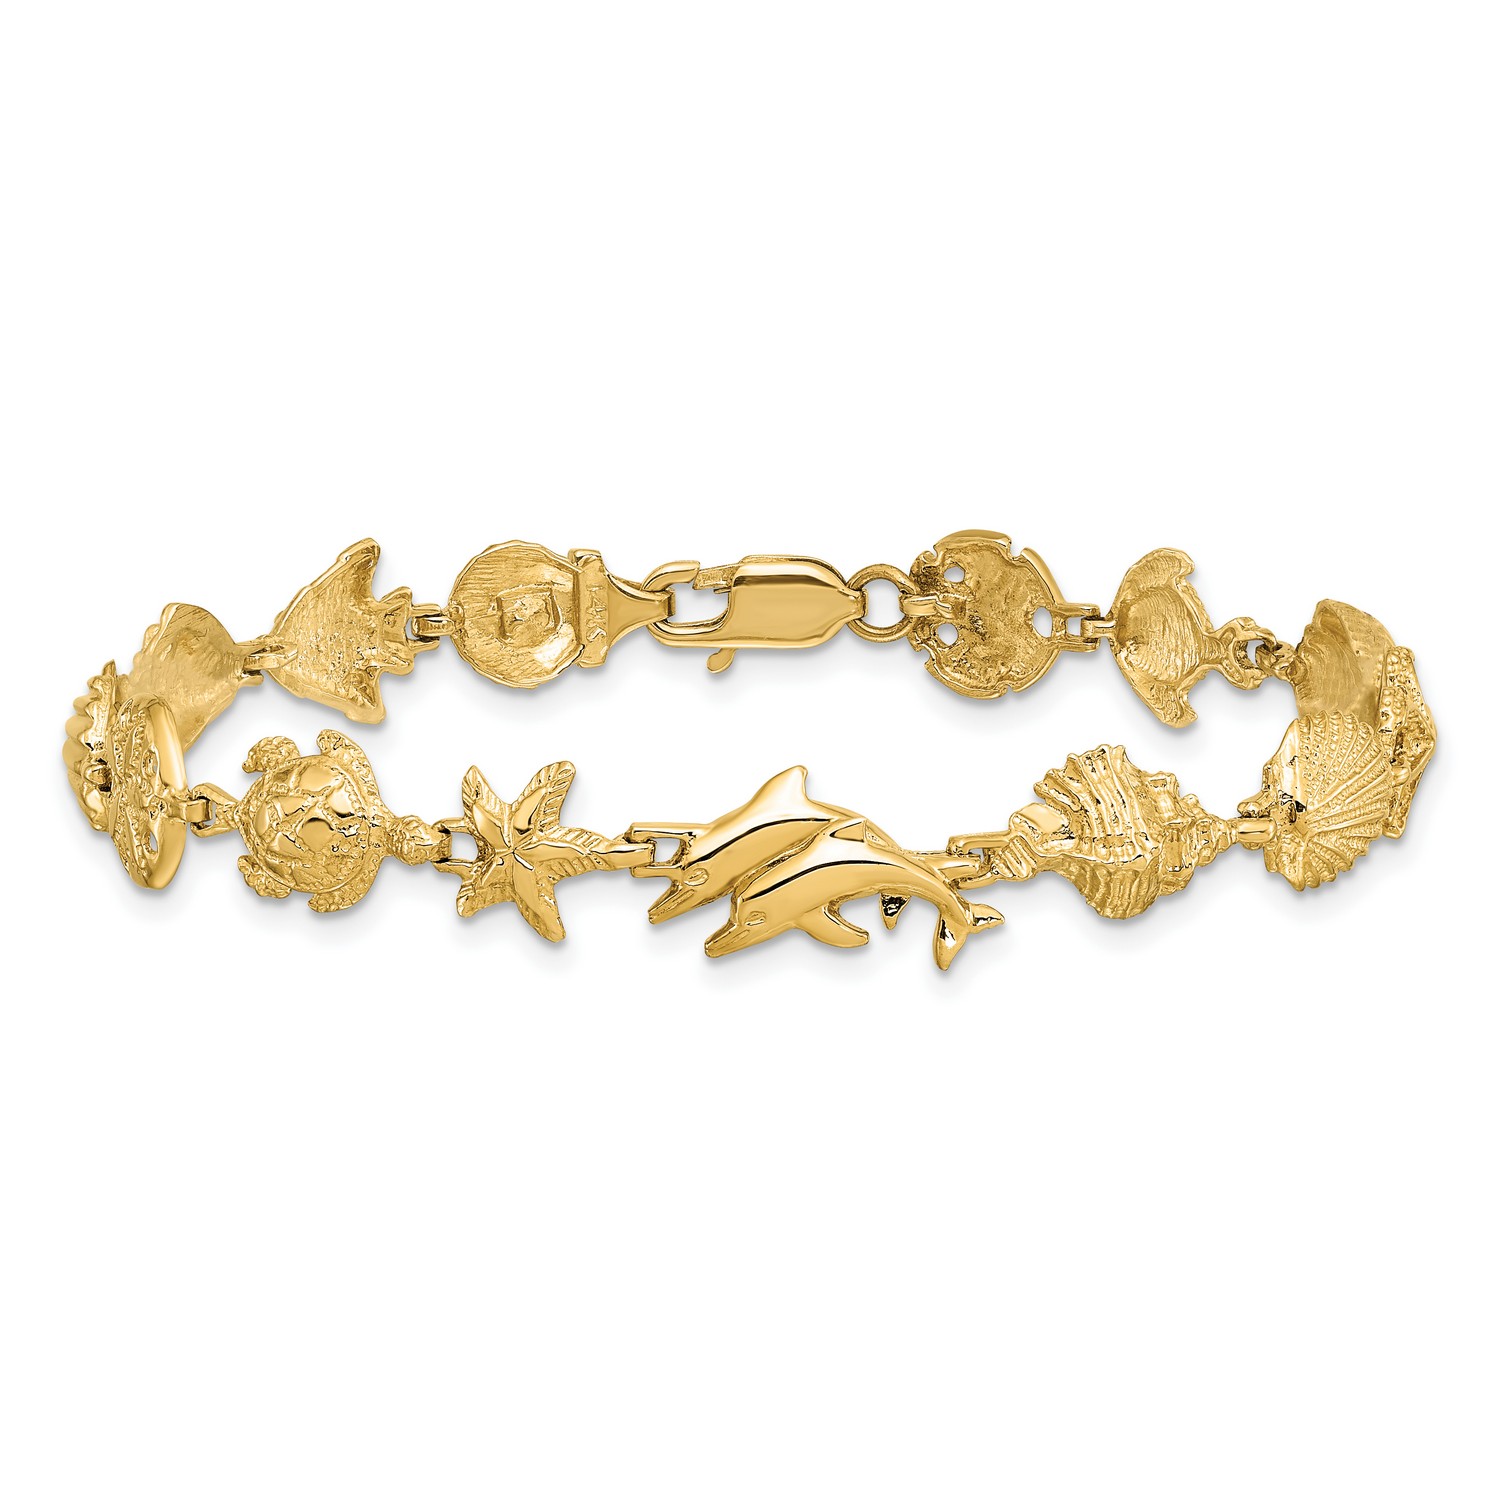 14k Yellow Gold Nautical Combination Dolphins Link Bracelet 7.25 in mm x 8 mm | eBay